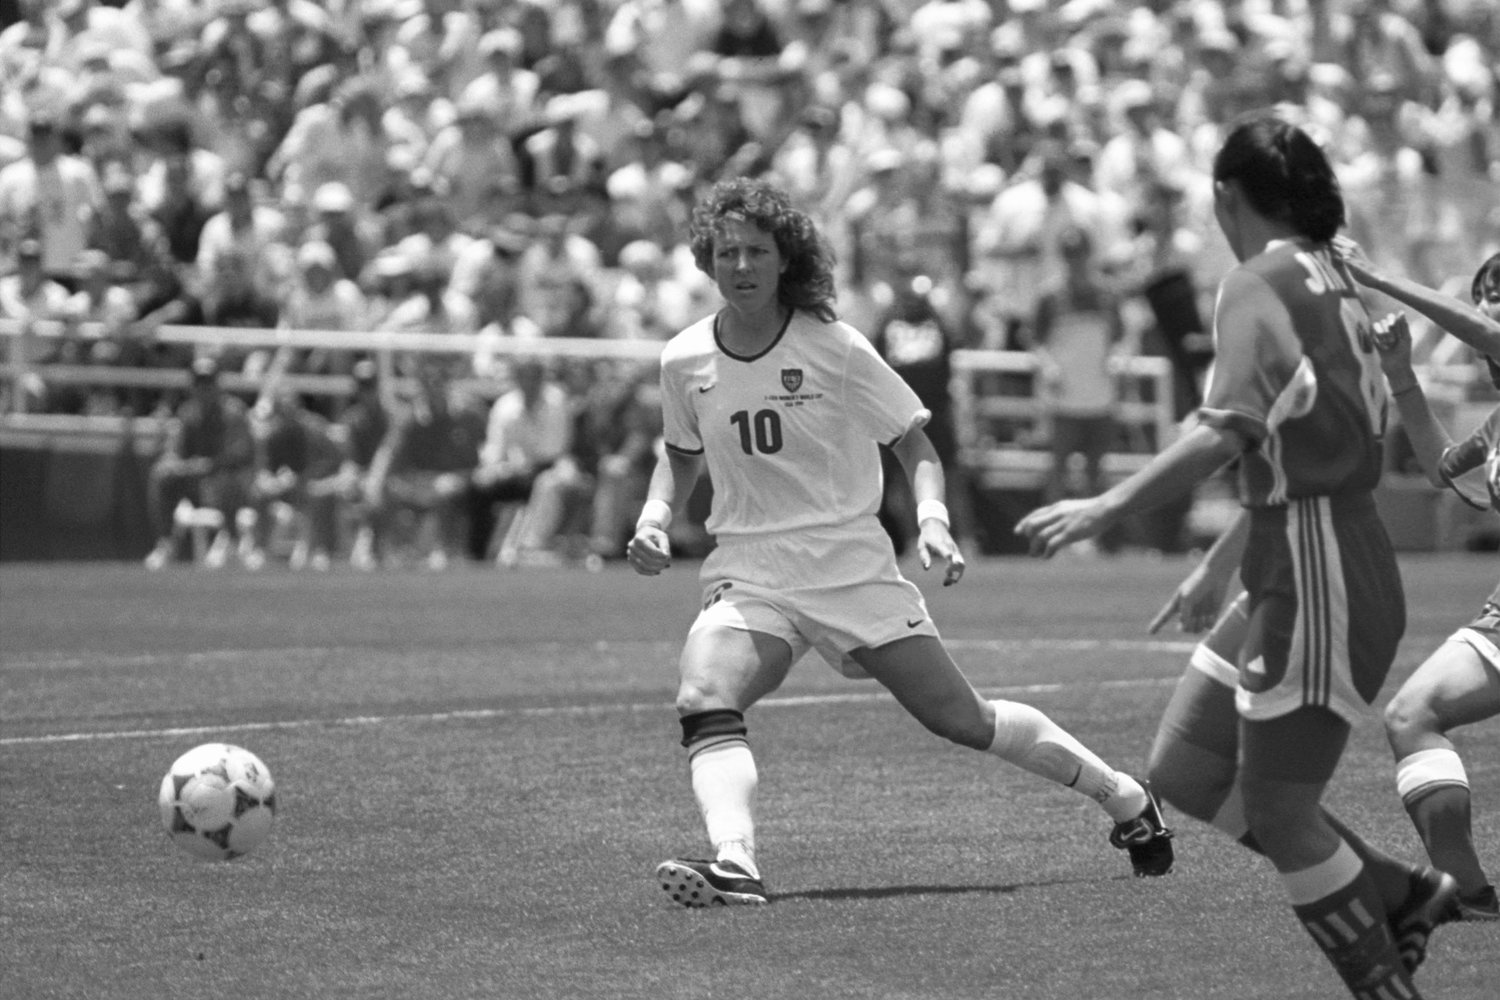 Michelle Akers in action at one of the United States Women's National Team games. As the first female global soccer star, Akers lent her unmatched heading skills and finishing touches to 2 FIFA Women's World Cup Championships (1991, 1999) and the Olympics (1996).